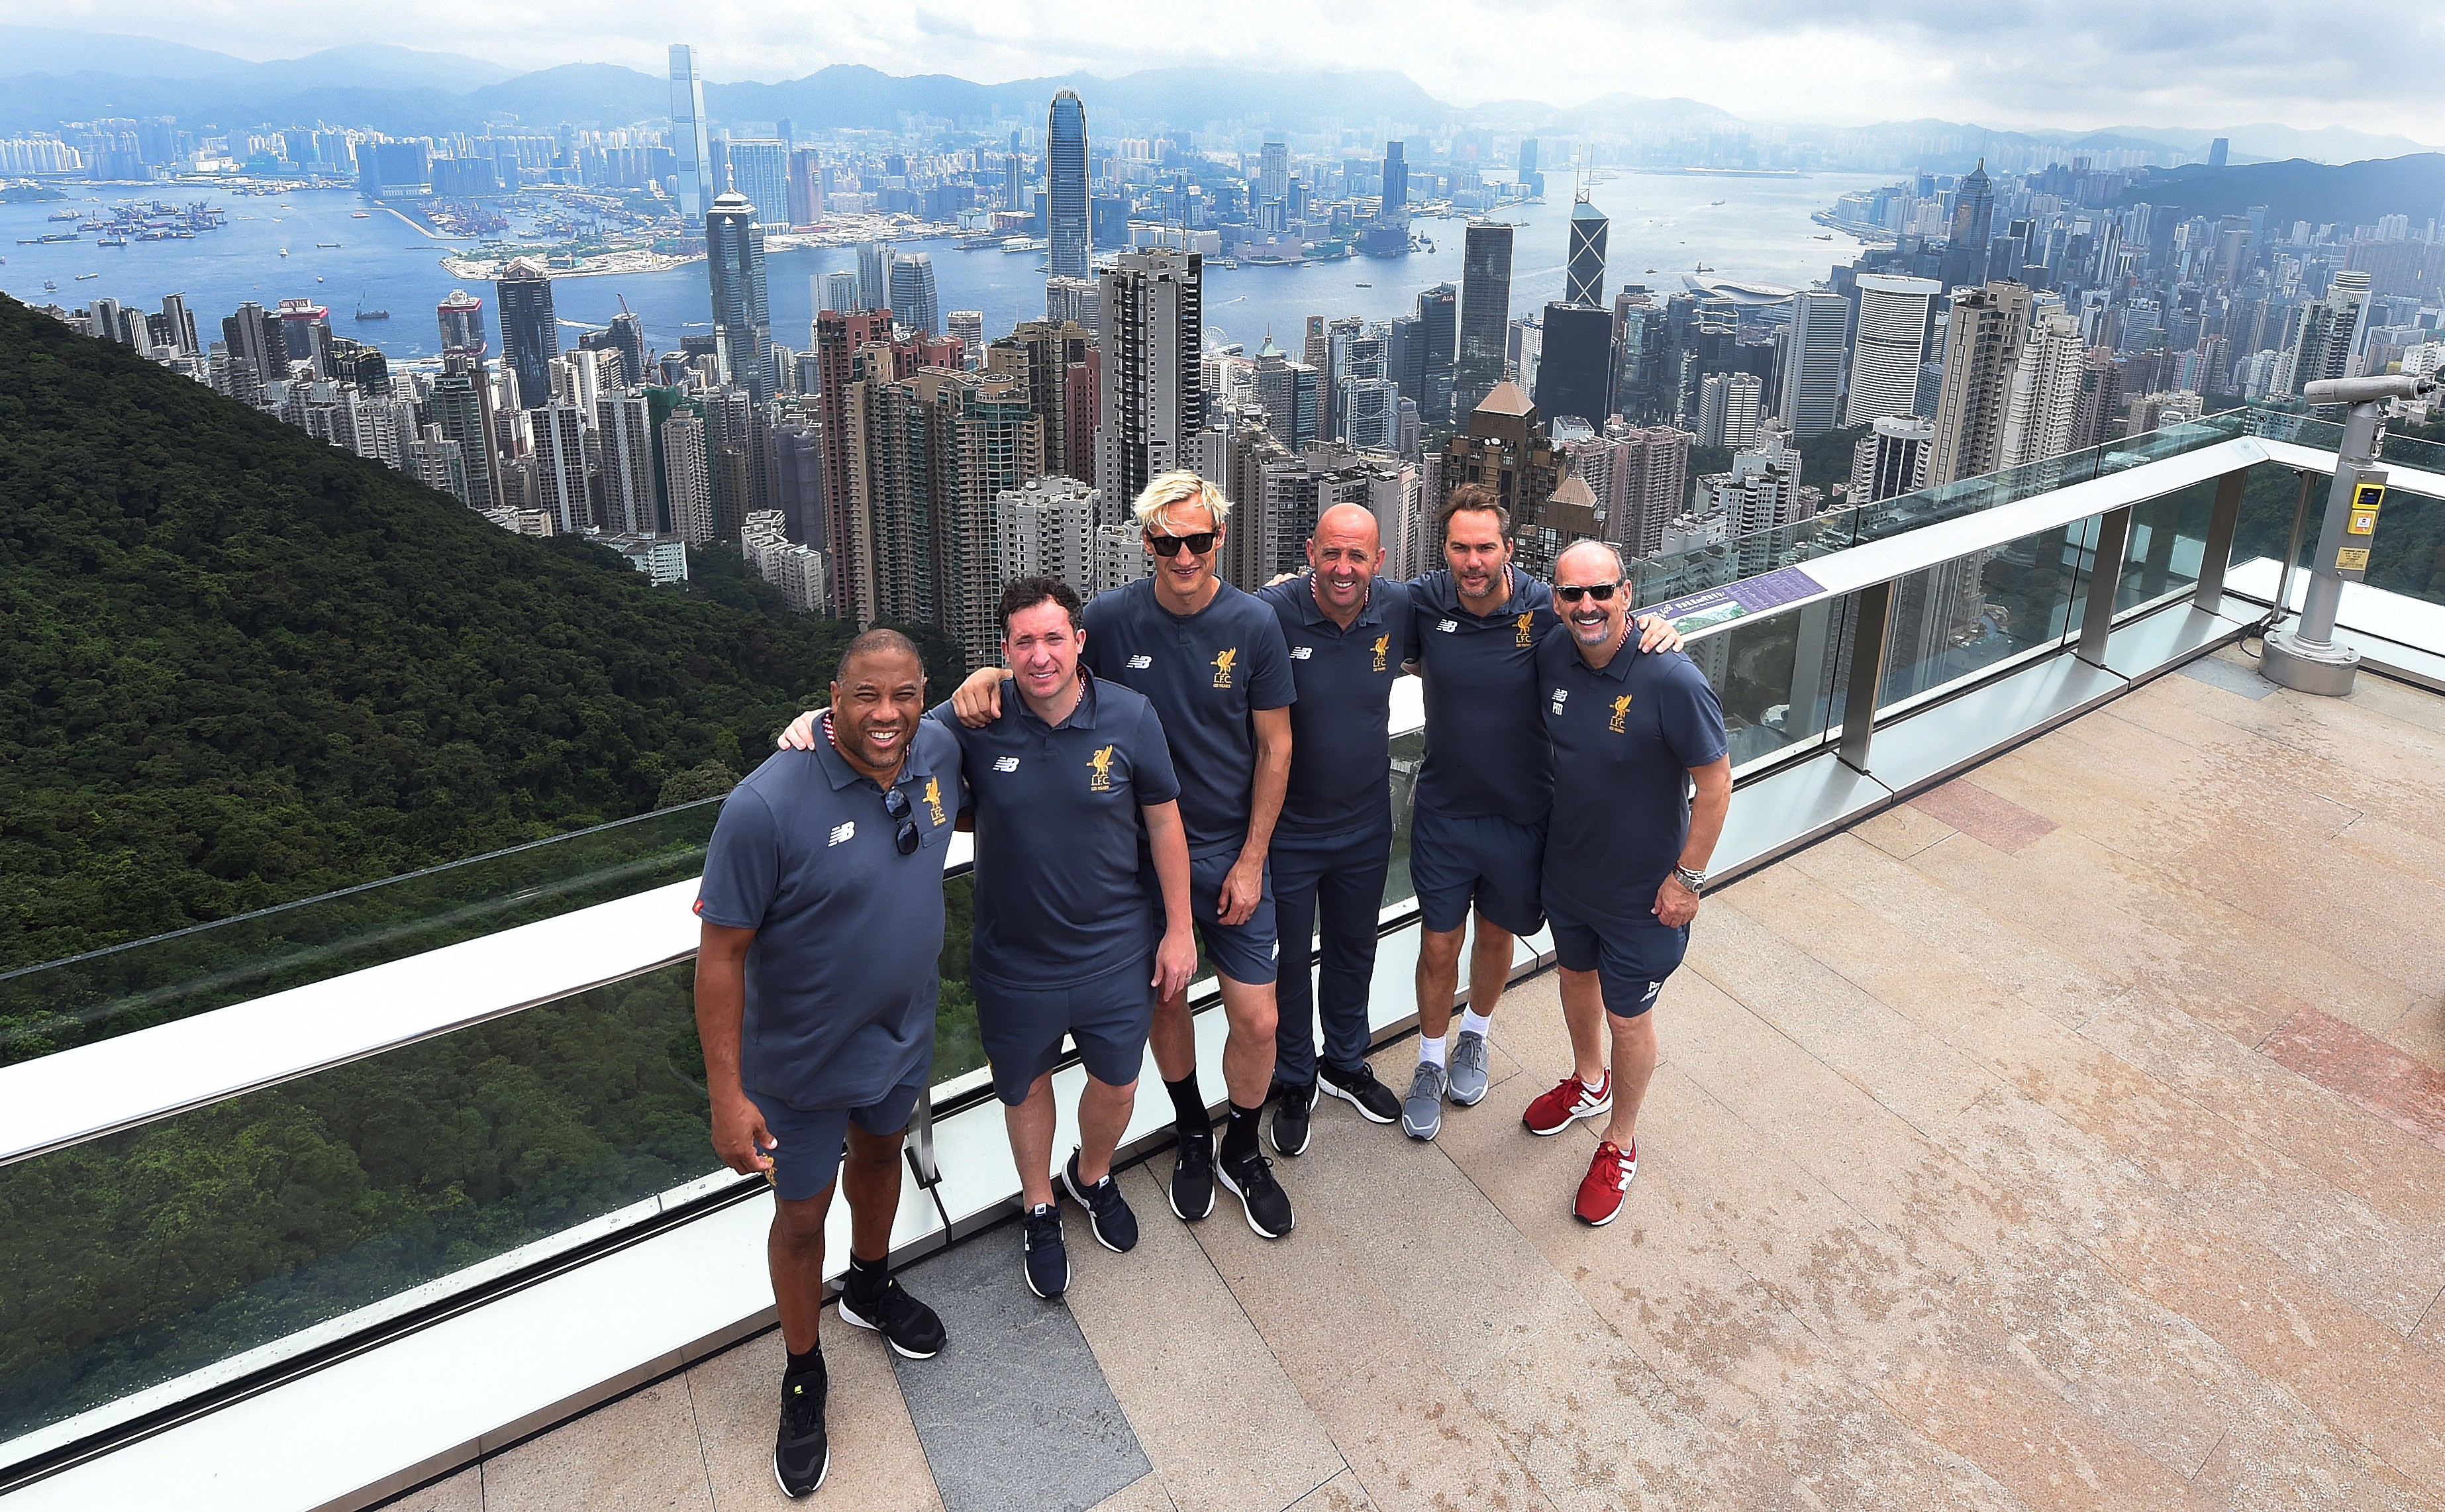 From left to right: Liverpool legends John Barnes, Robbie Fowler, Sami Hyypia, Gary McAllister, Jason McAteer and chief executive Peter Moore on top of the Peak. Photo: Handout